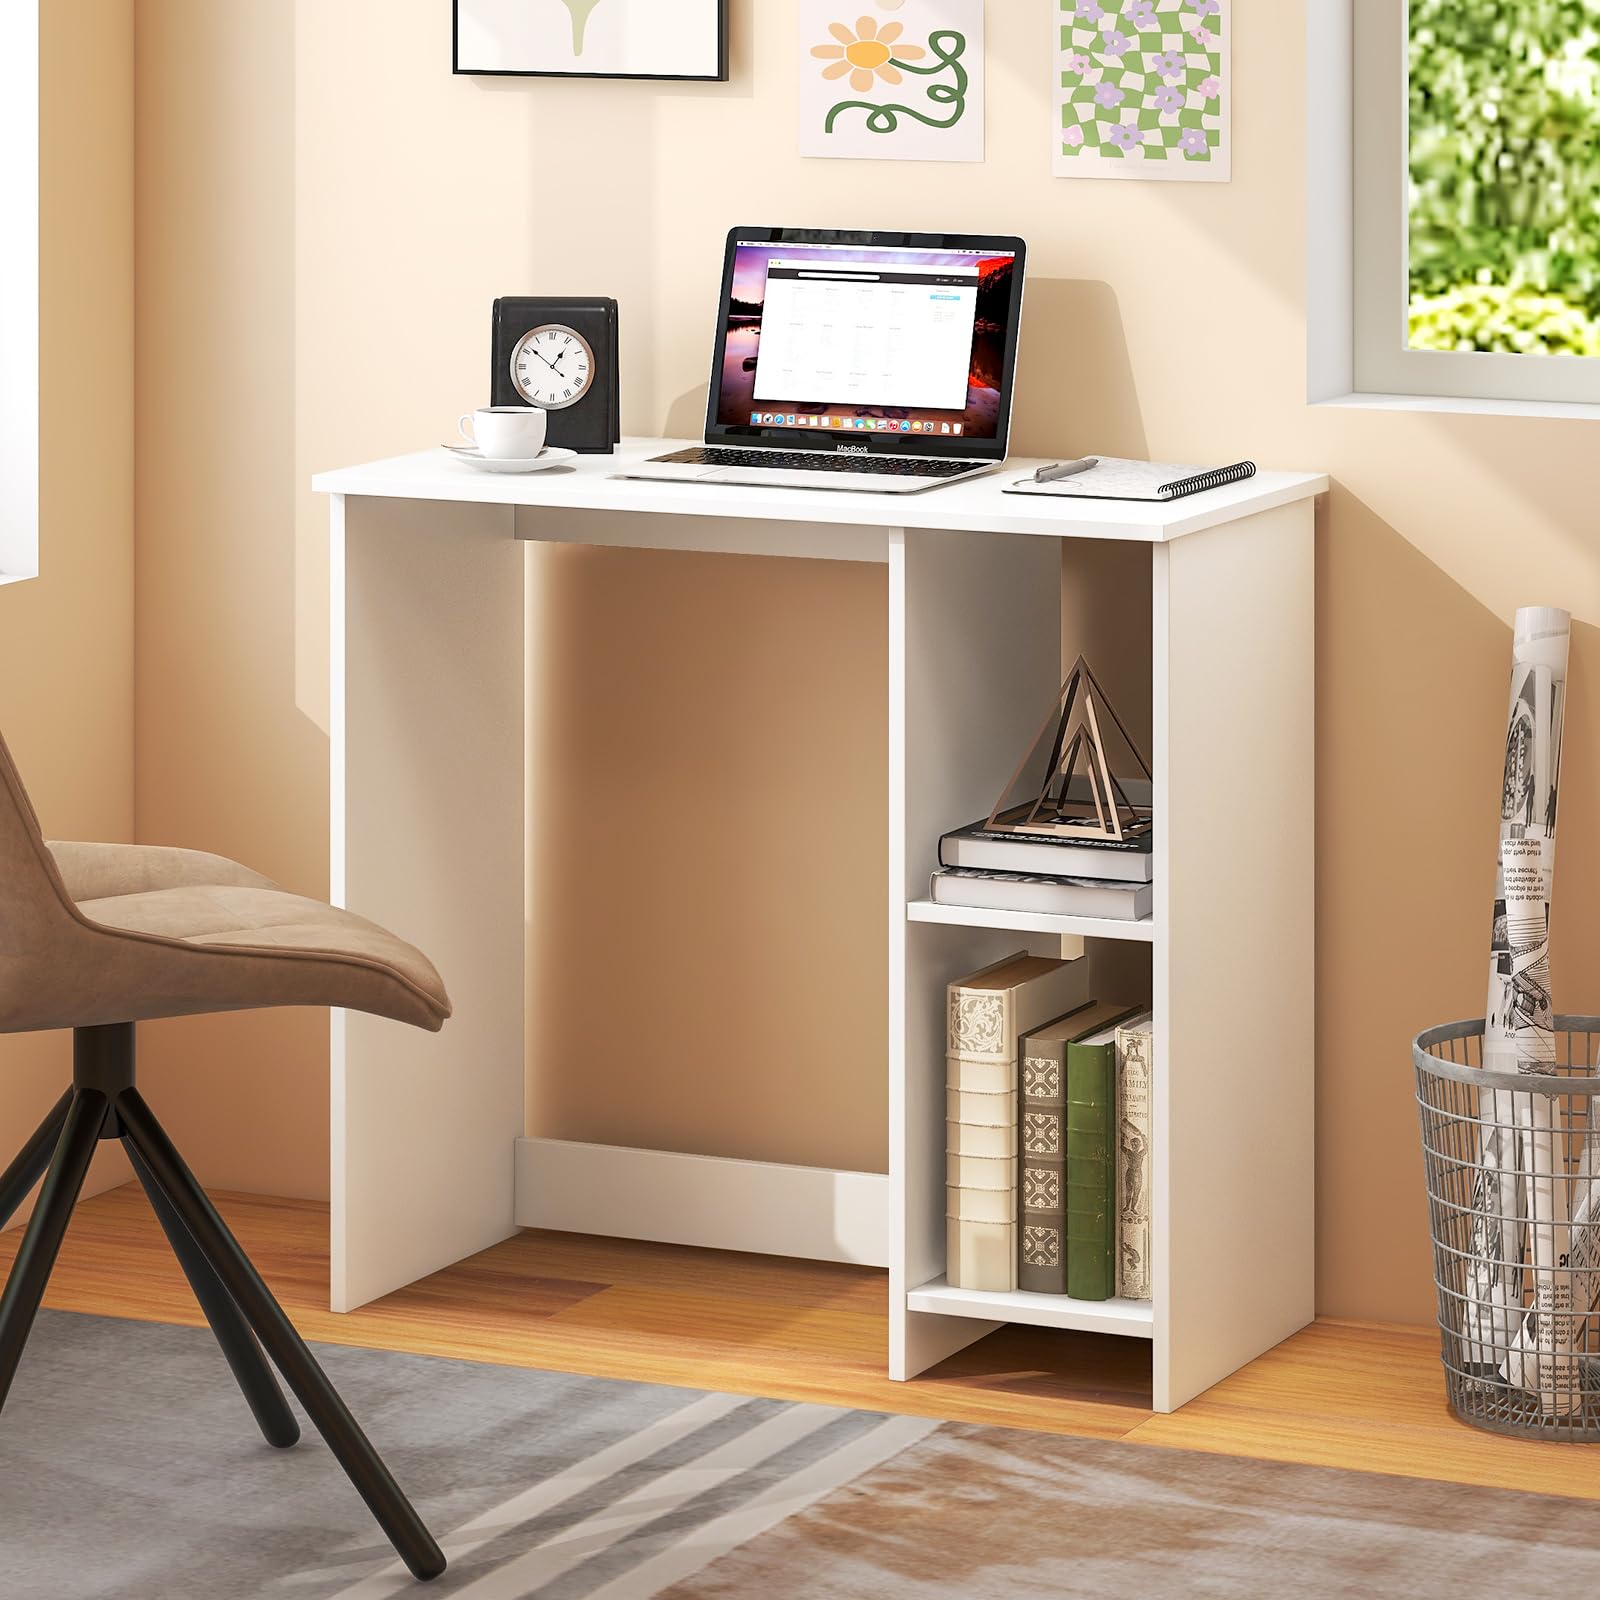 Tangkula White Desk with Storage Drawer & Shelves, Compact Desk